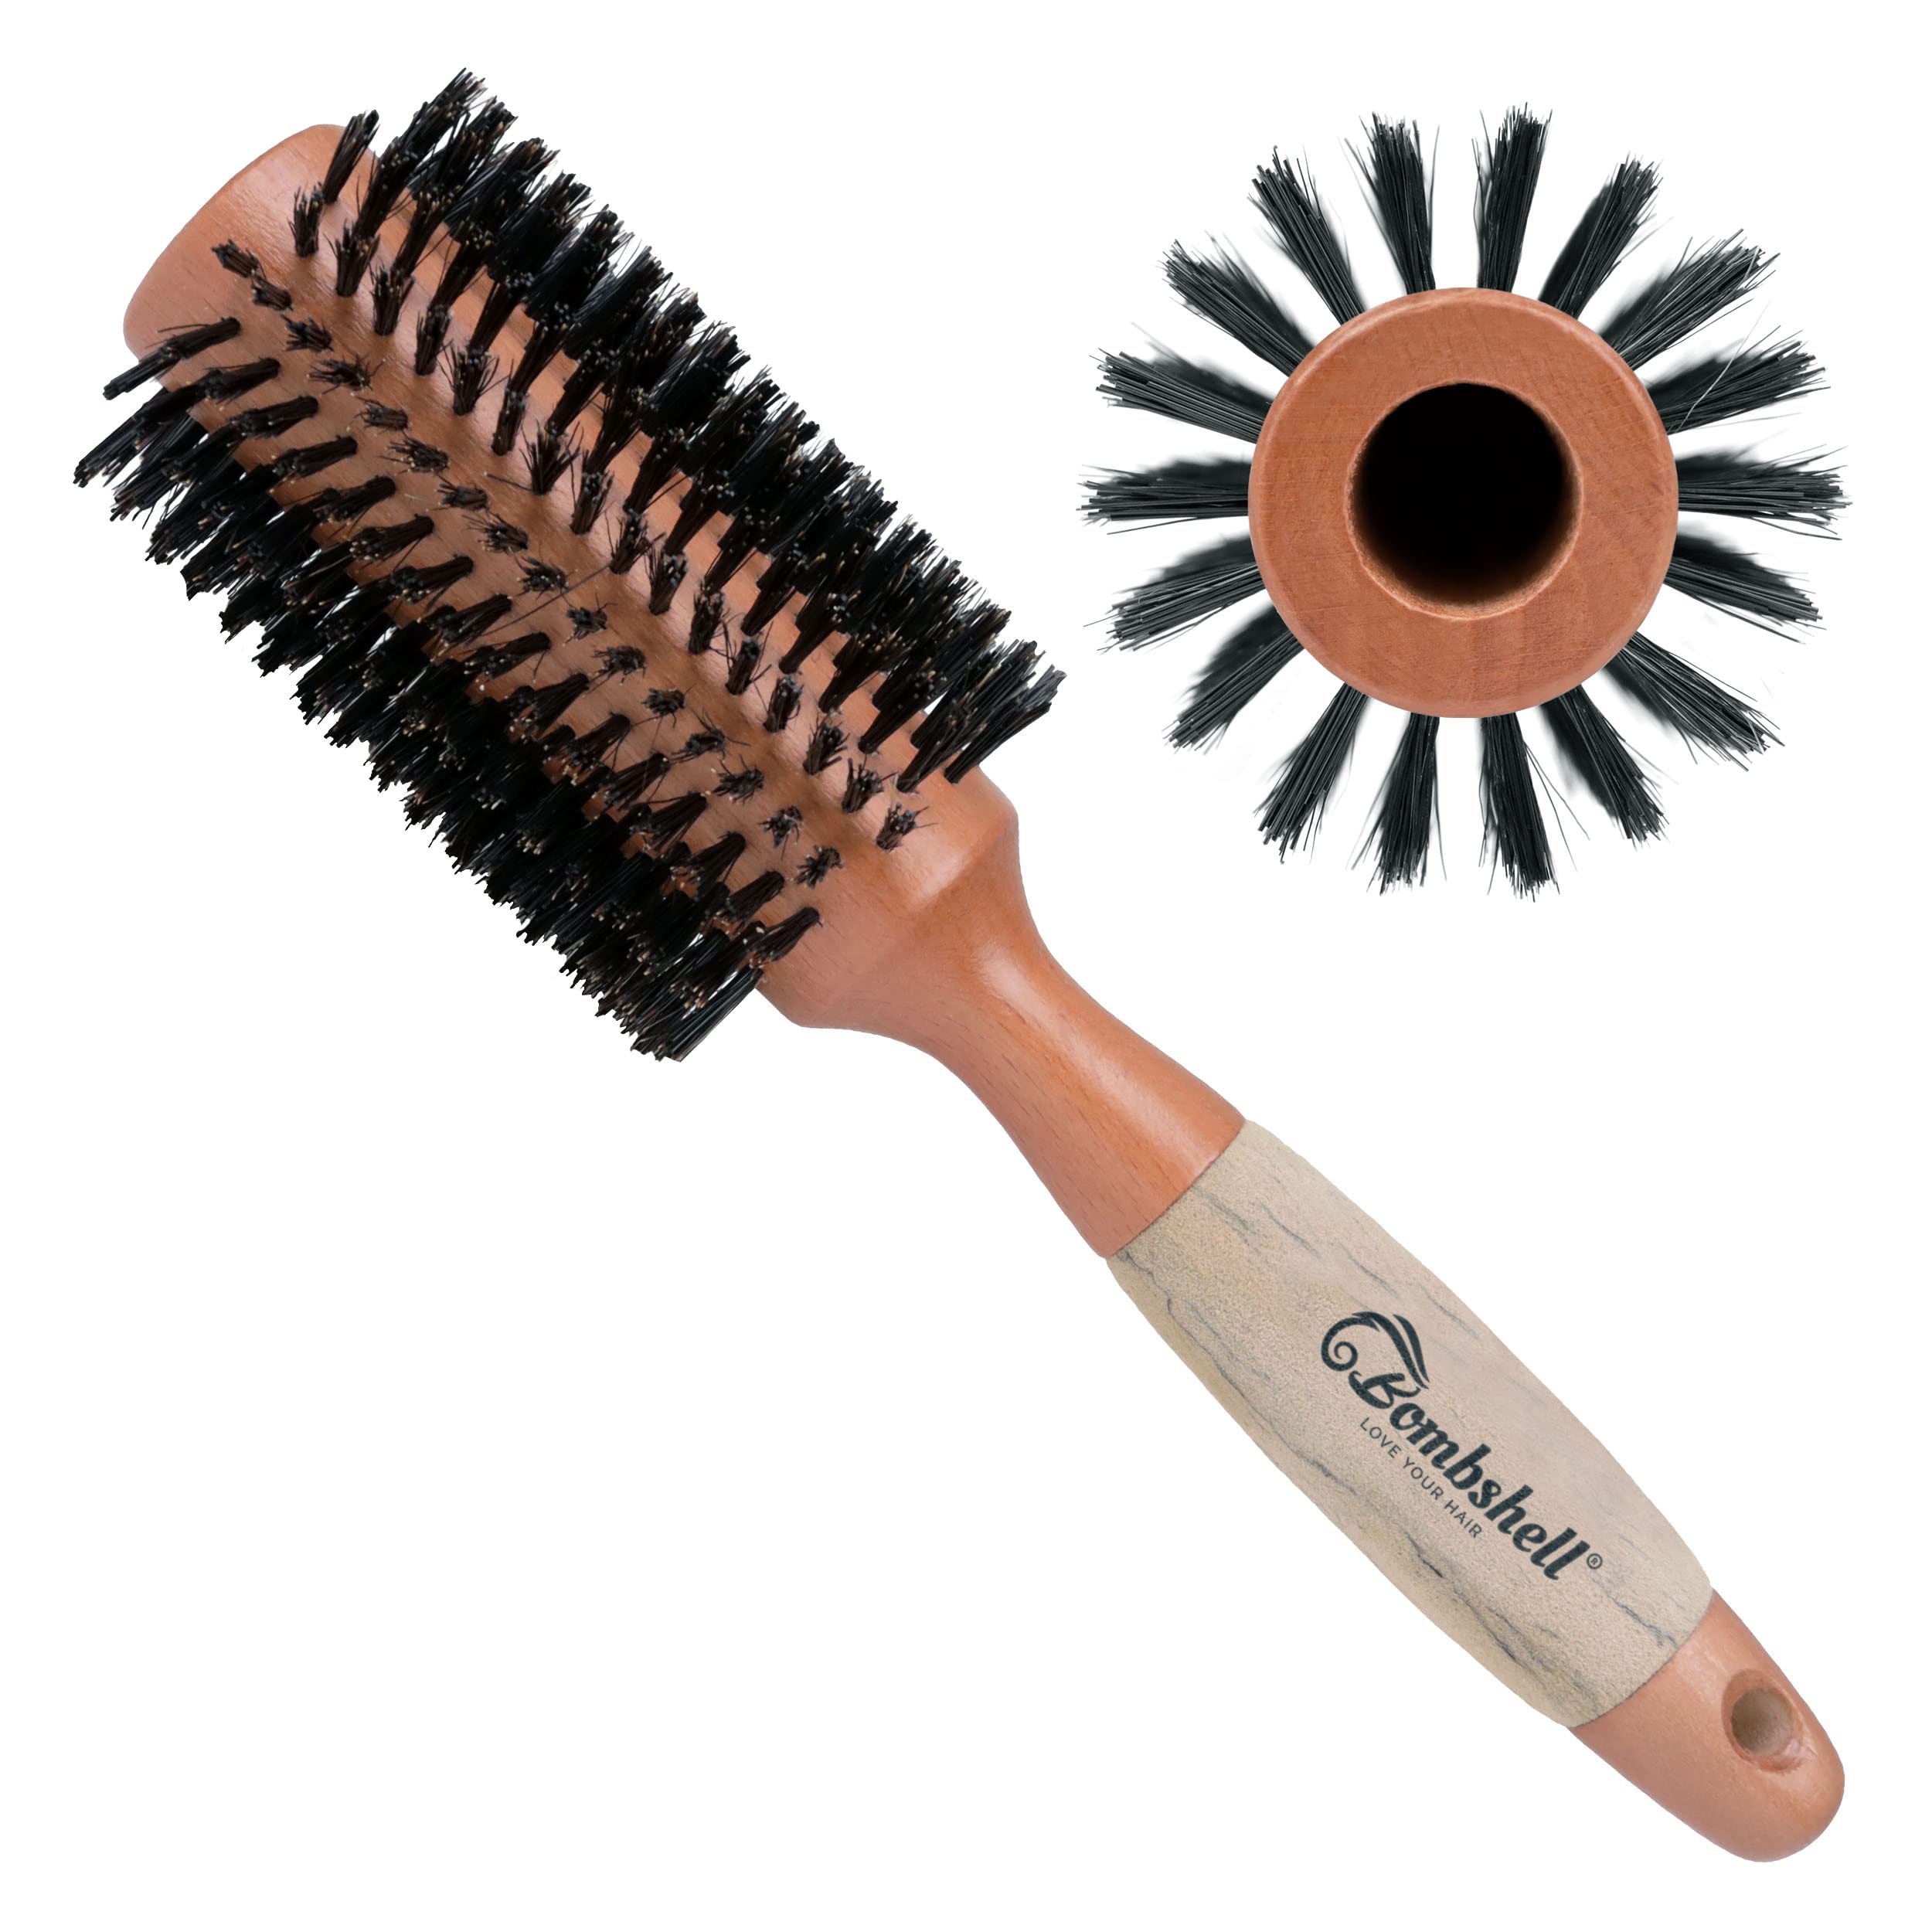 Bombshell Birch Wood Round Boar with Brush and Round Styling, Bristle Wood Curling (2.5 Natural Handle, Blow inch) Round — Hair Brush Out, Sustainable Birch Brush for